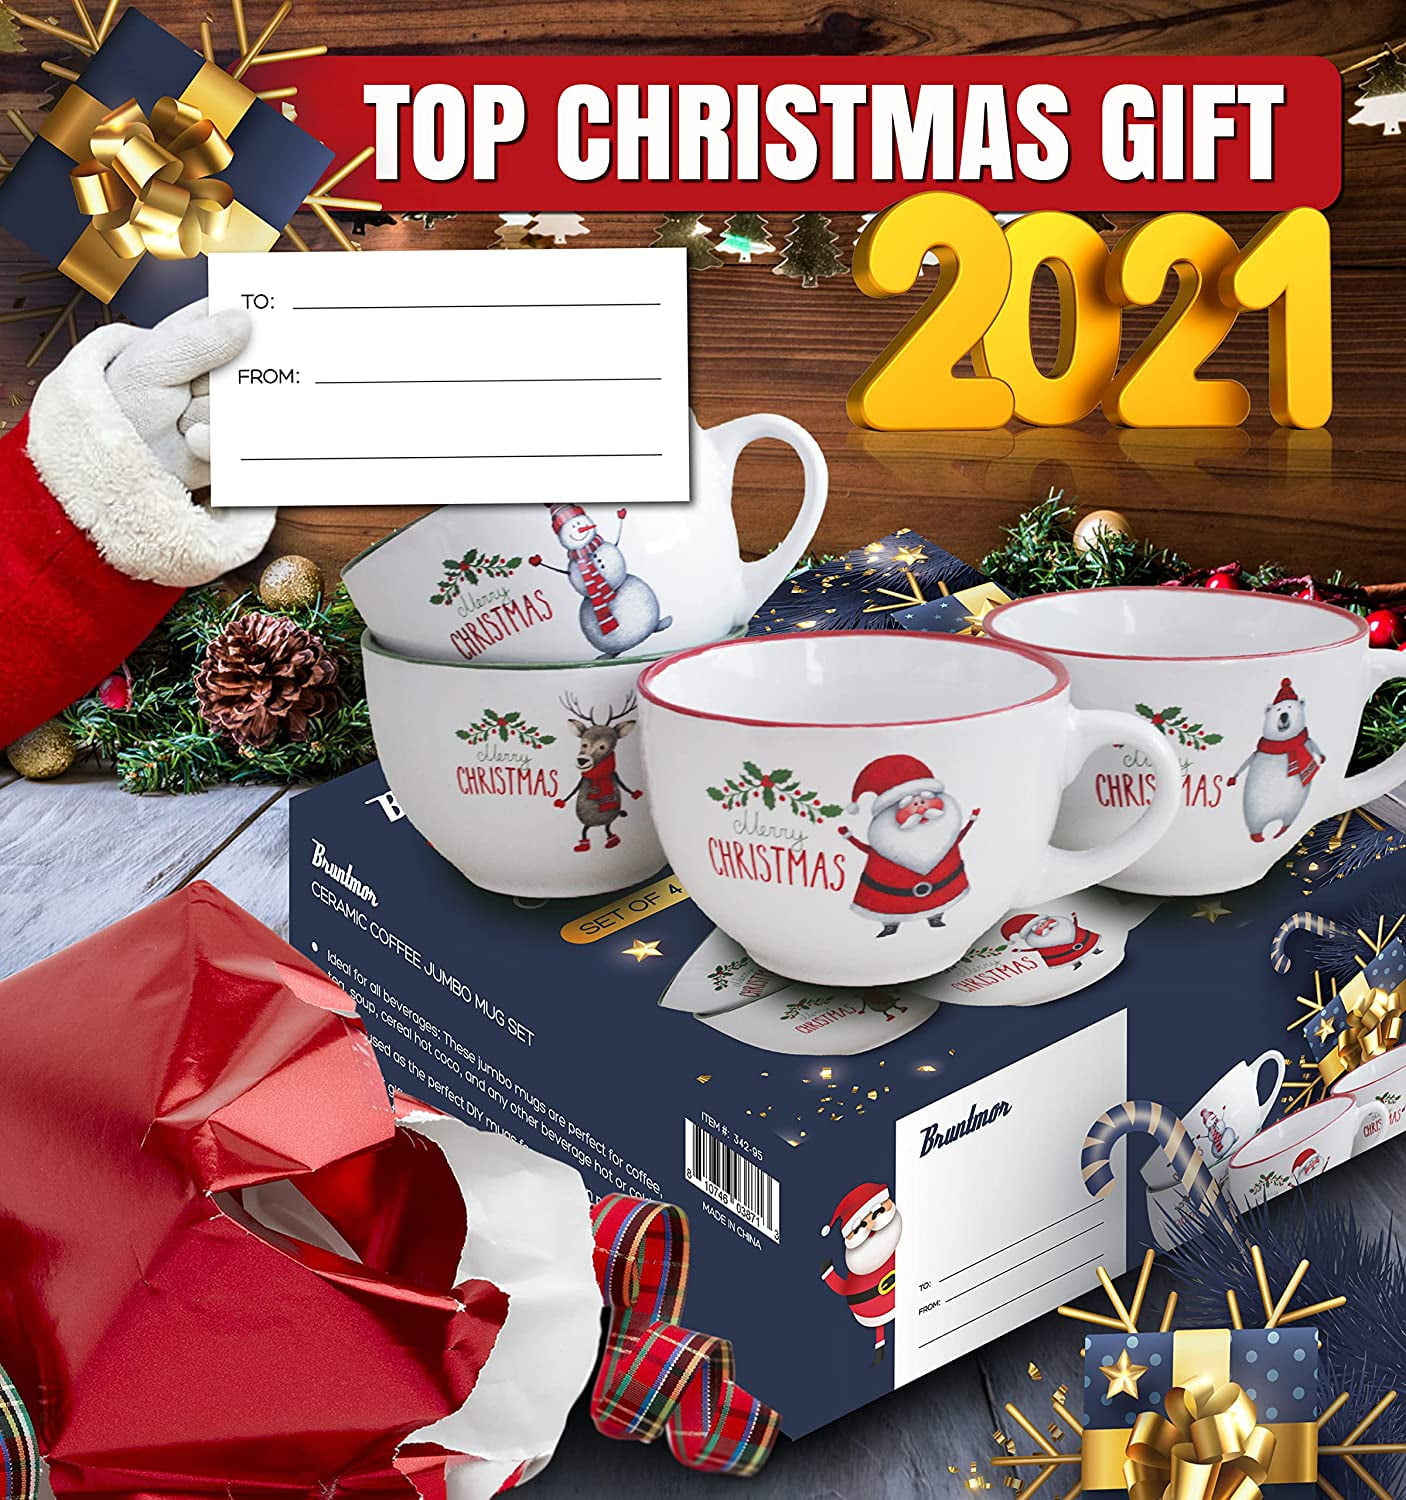 Christmas Gifts Large Coffee Mugs Giant LARGEST MUG IN THE WORLD GIFT BOXED  Cup